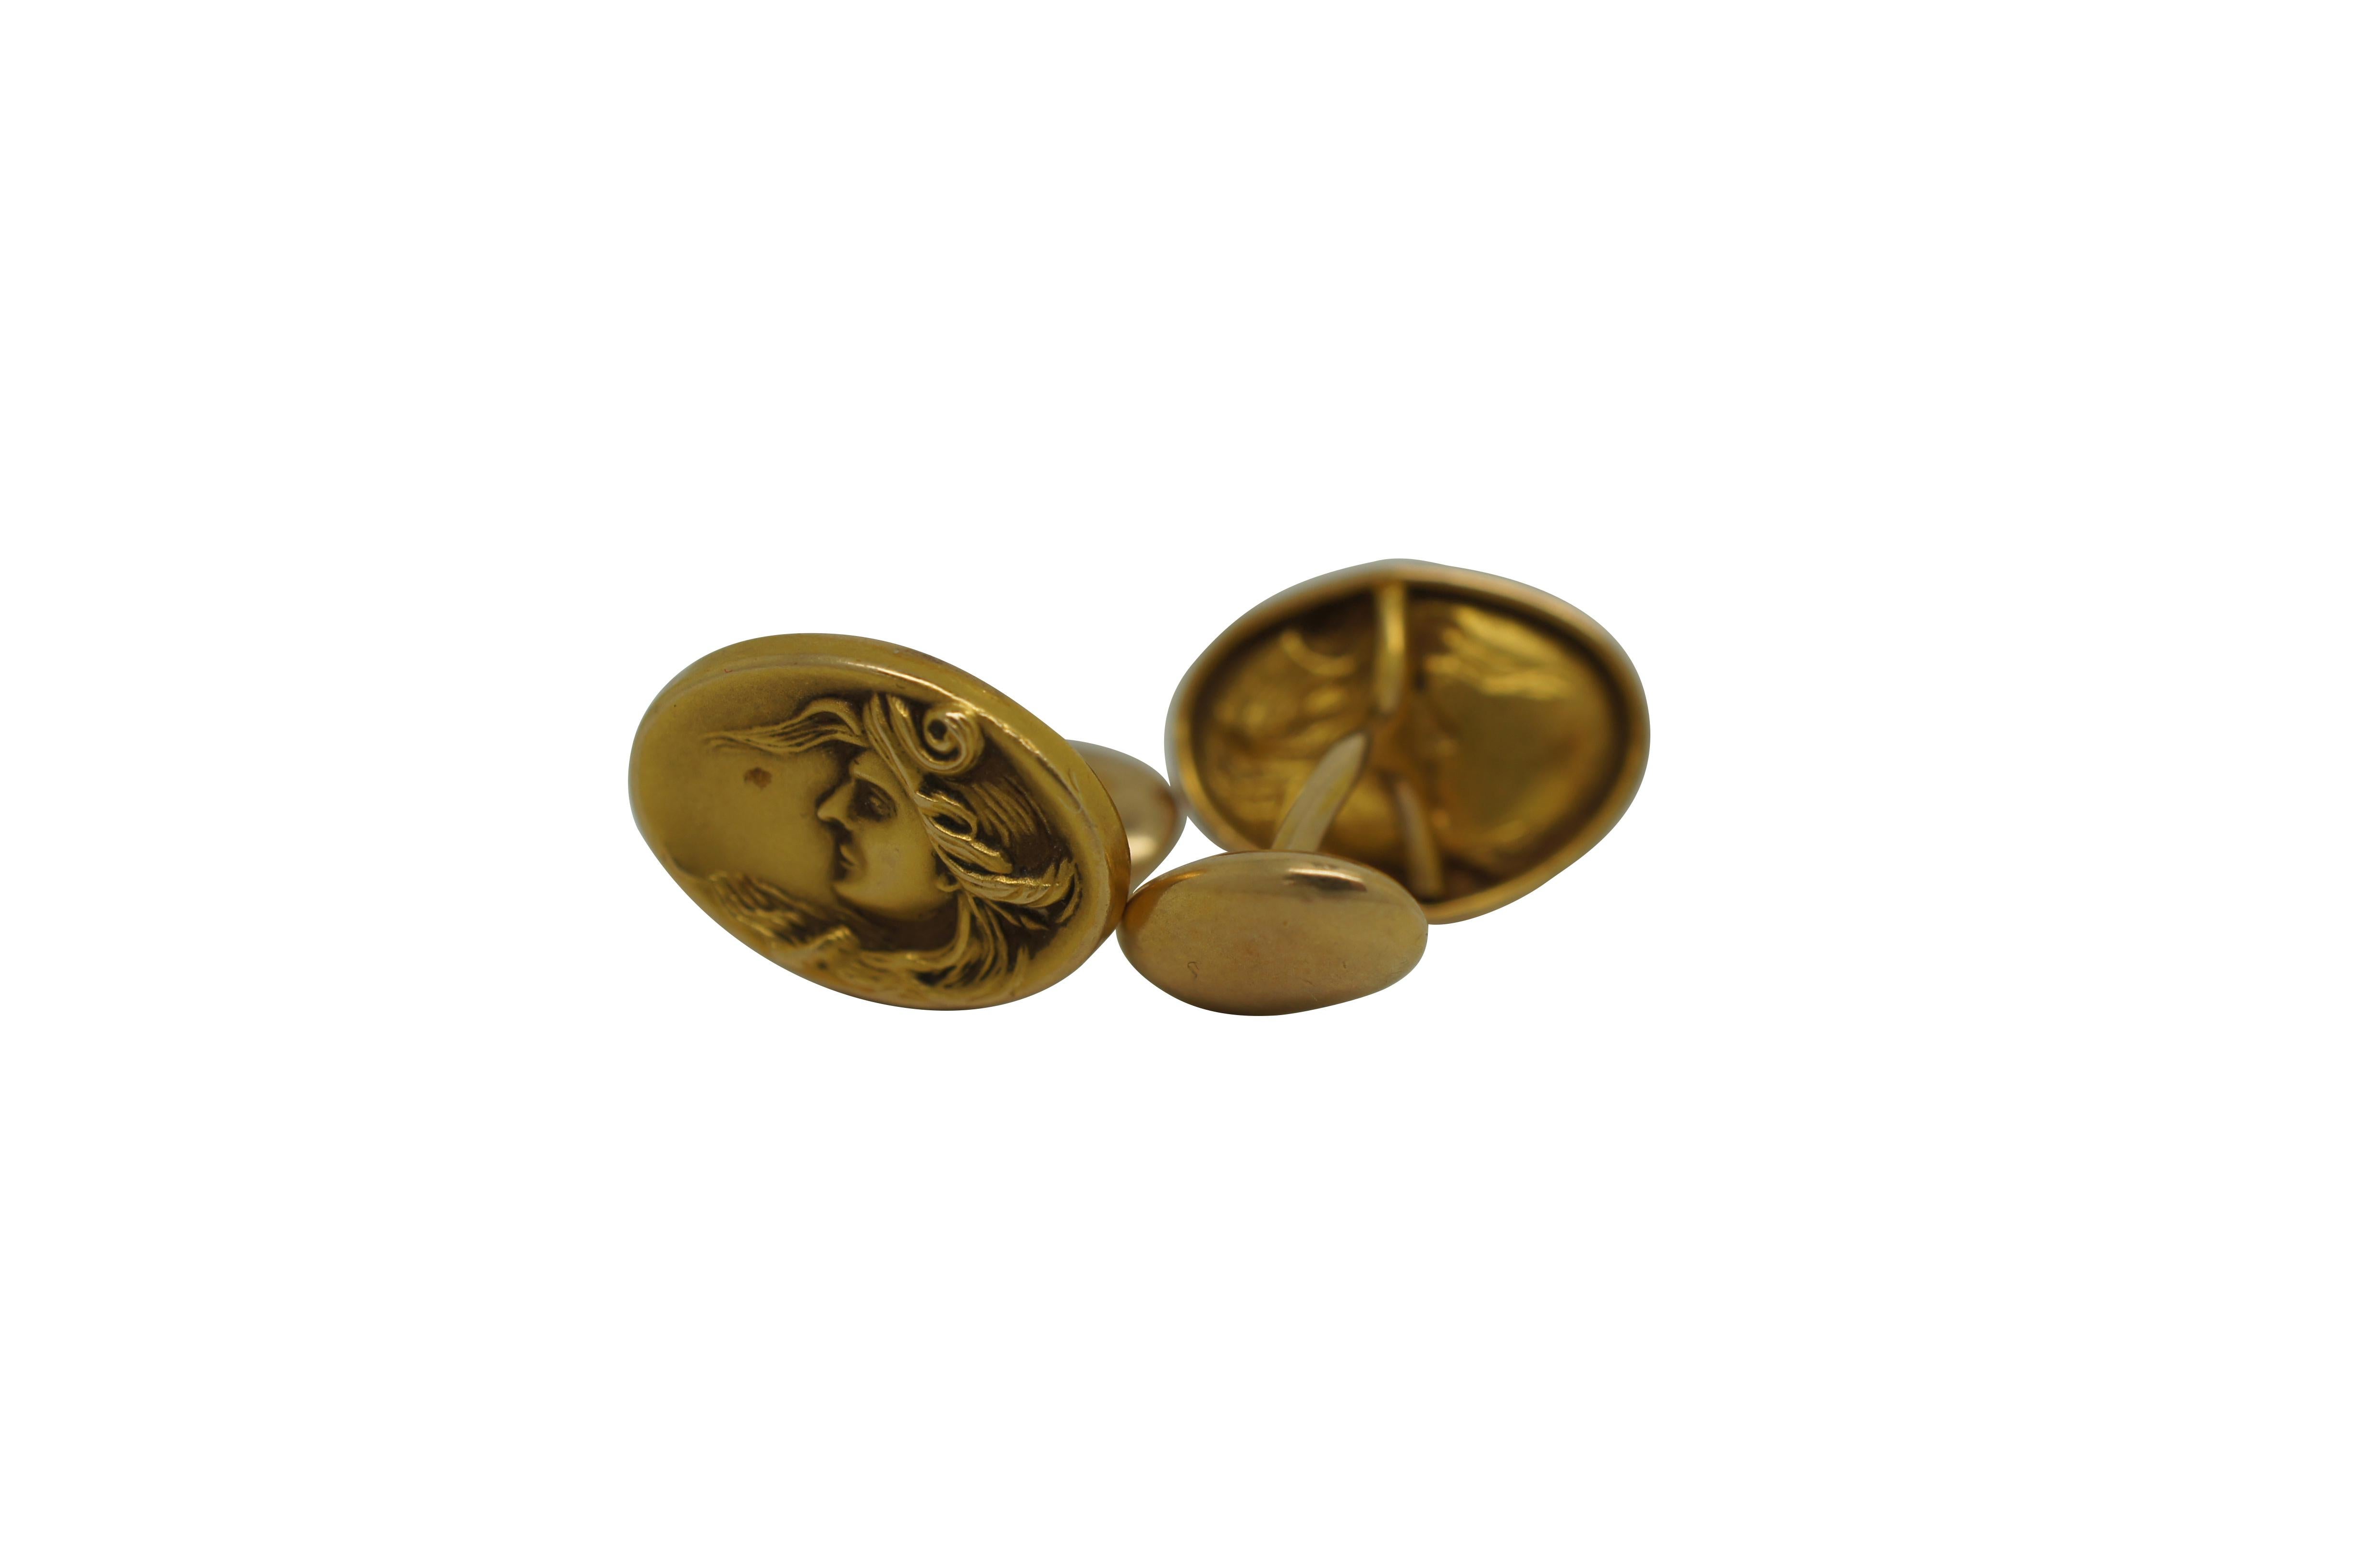 Antique Art Nouveau 10K Yellow Gold Oval Female Silhouette Face Cufflinks 3g In Good Condition For Sale In Dayton, OH